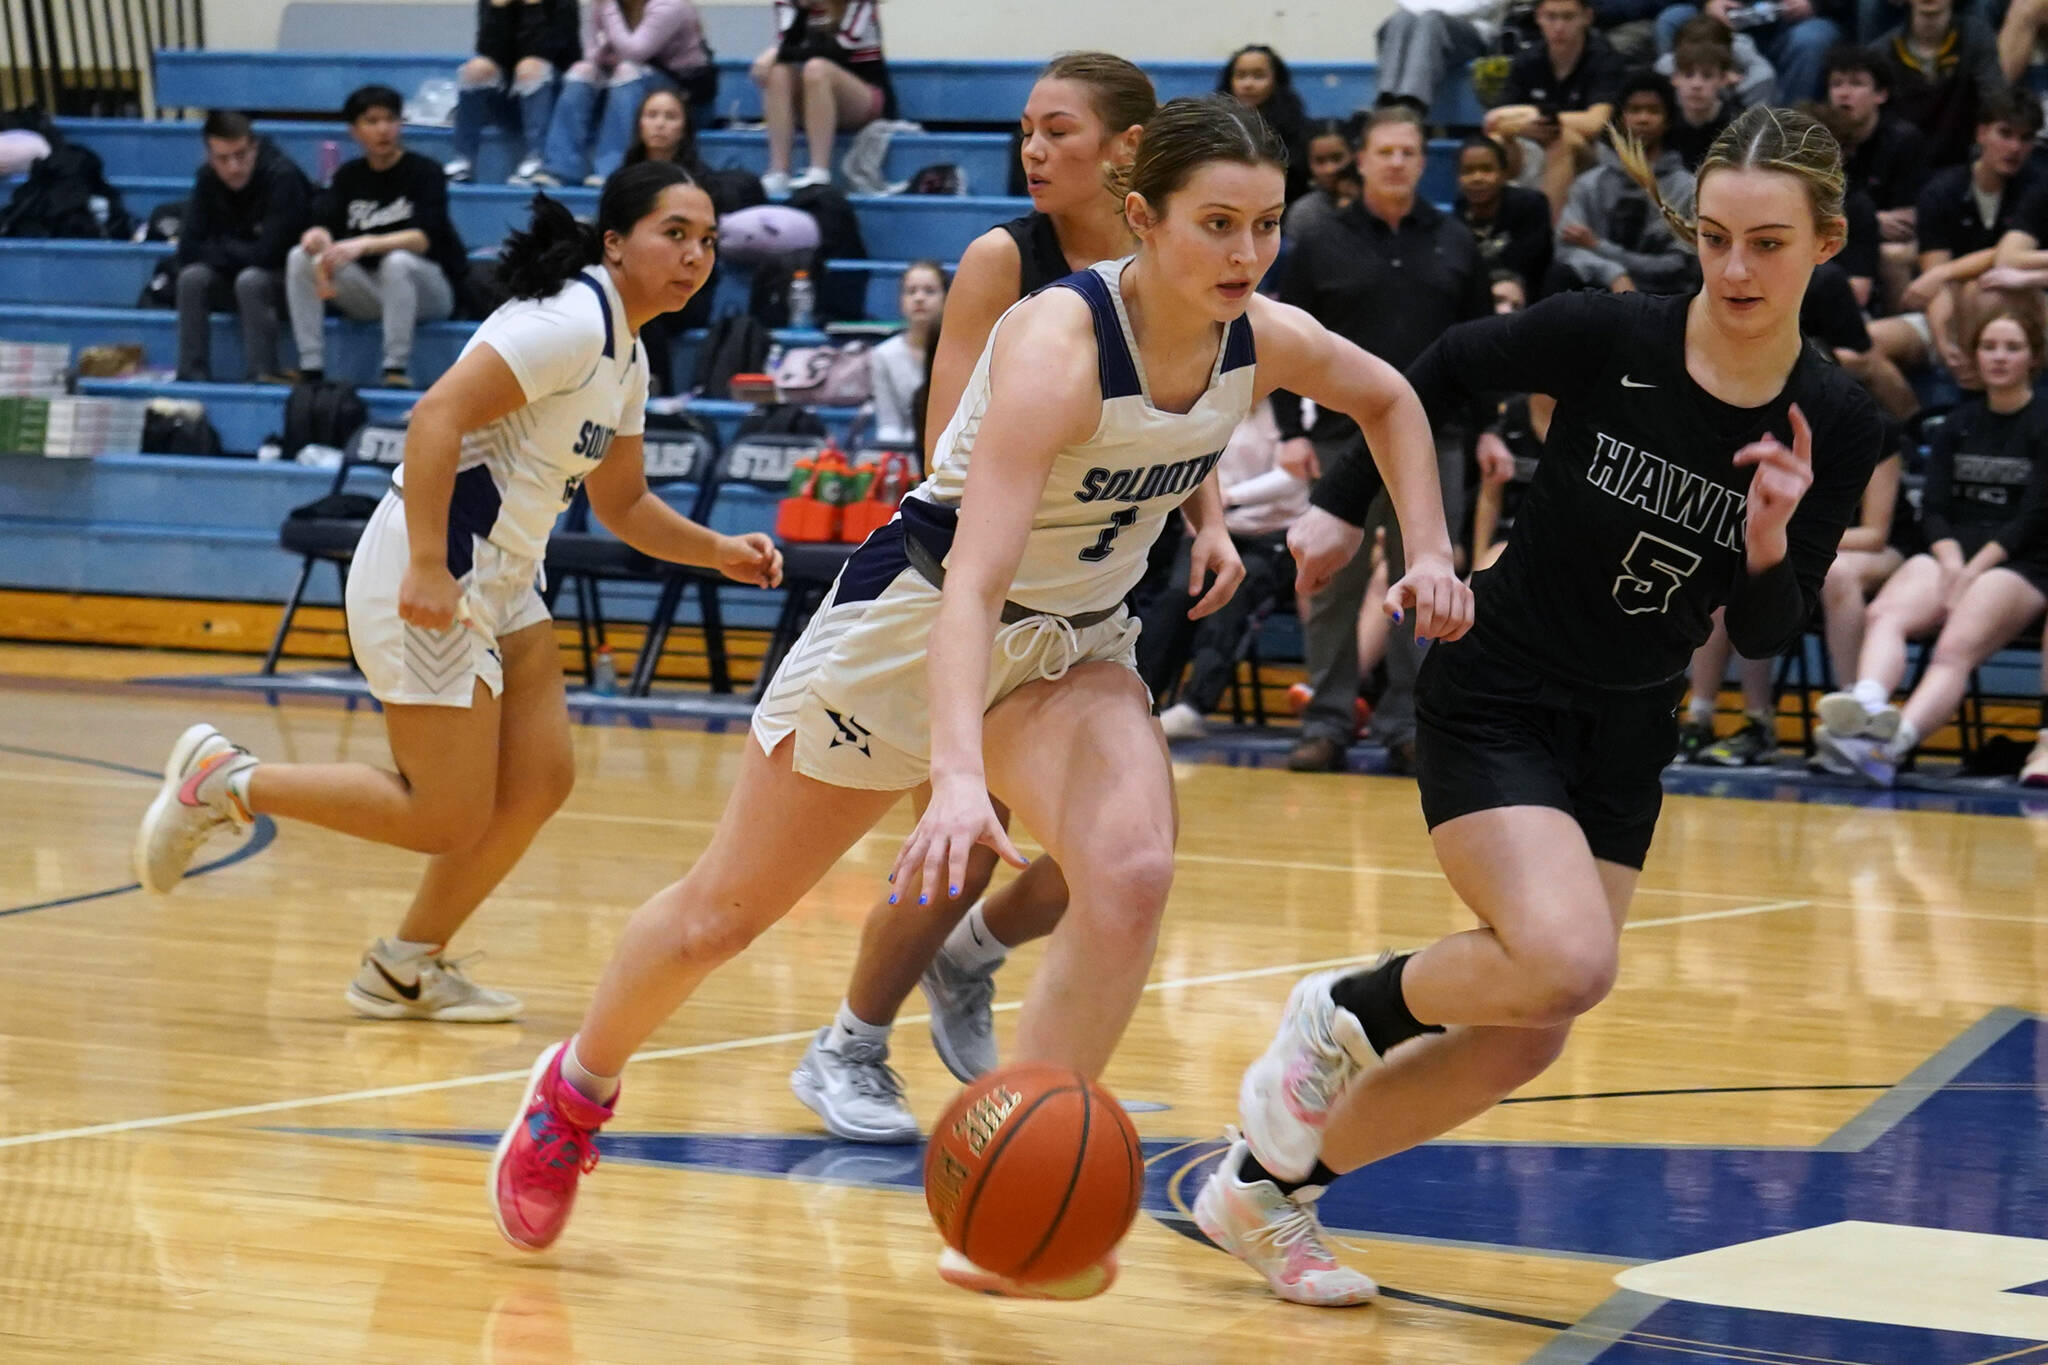 Soldotna’s Kaytlin McAnelly, backed by teammate Izzy Cruz, moves with the ball against defensive play by Houston’s Andi Robinson during a basketball game at Soldotna High School in Soldotna, Alaska, on Friday, Feb. 23, 2024. (Jake Dye/Peninsula Clarion)